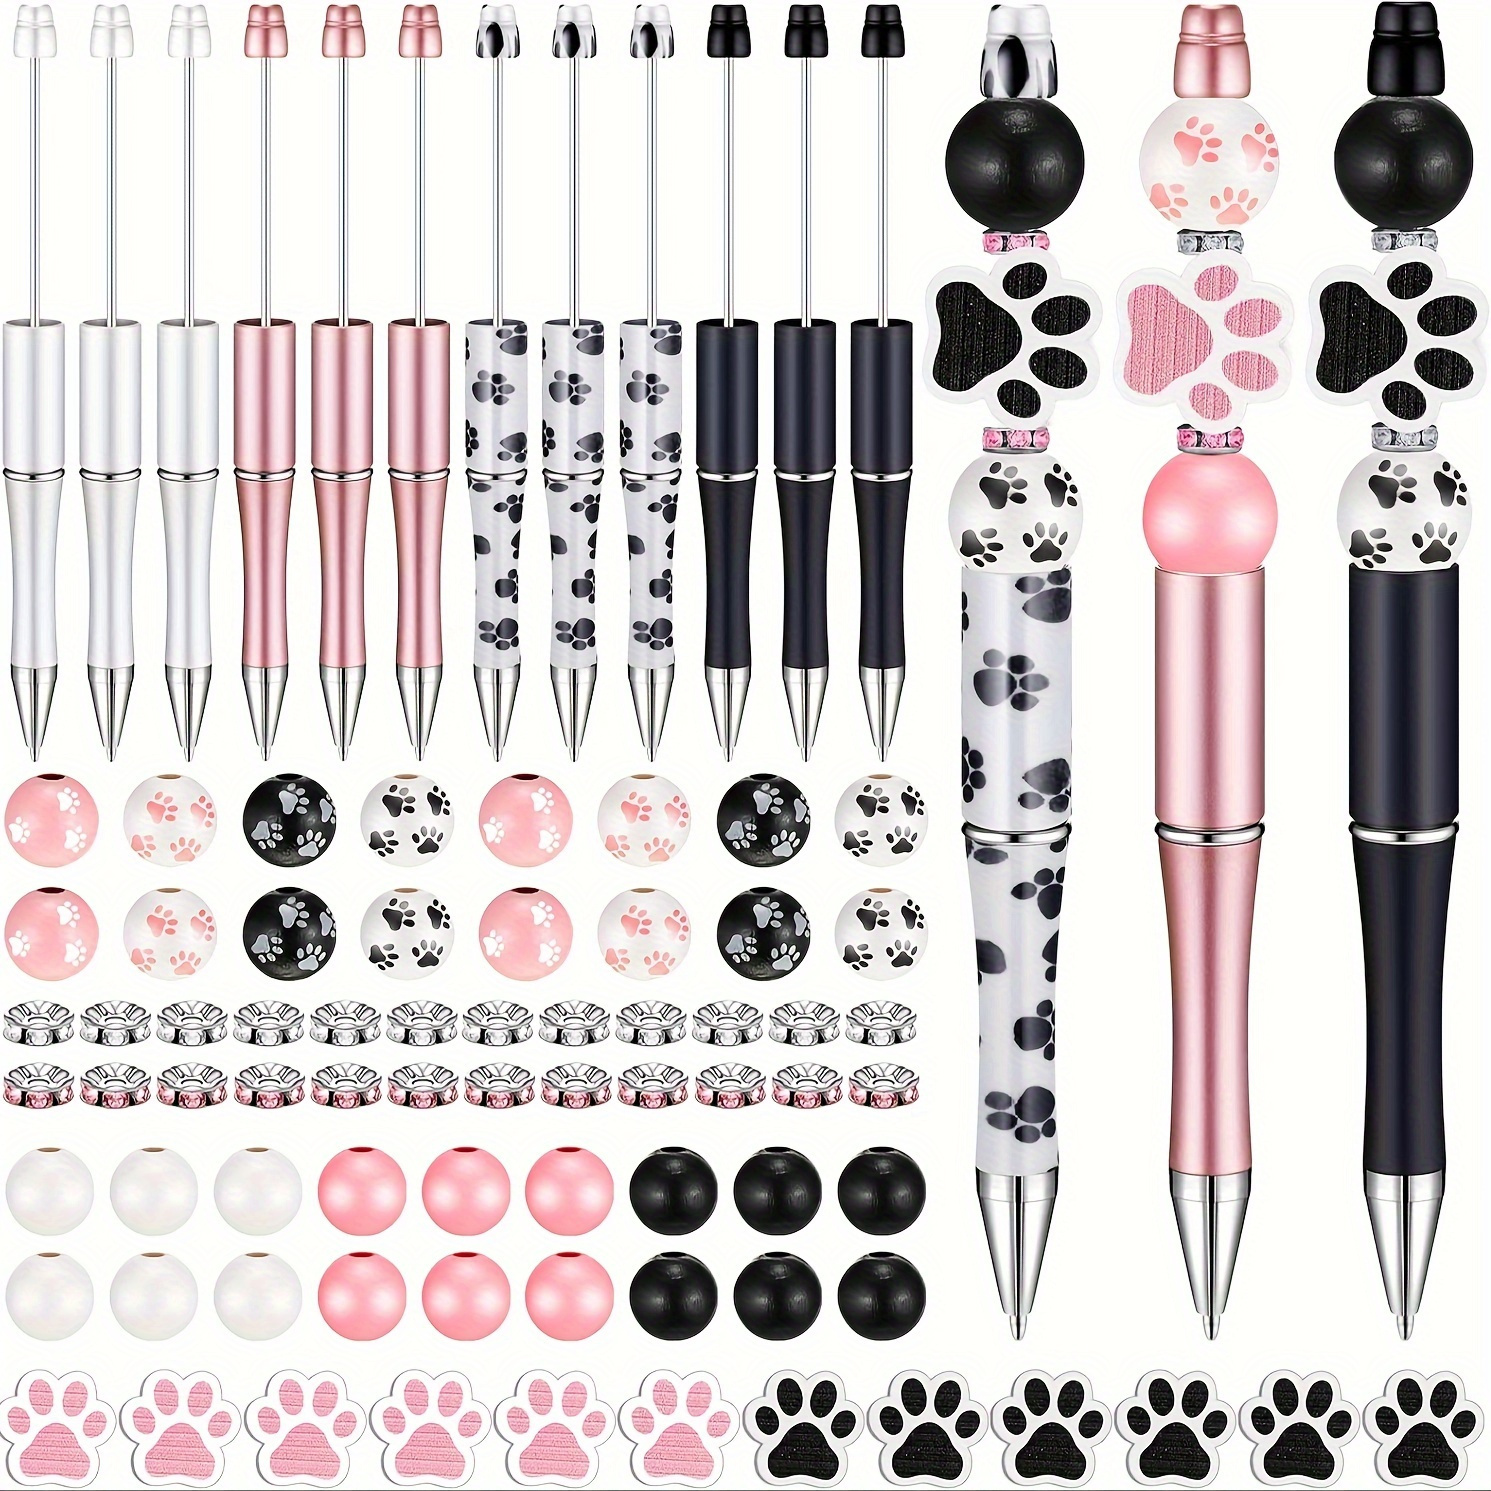 

Diy Beaded Ballpoint Pen Kit - 82pc Set With Wooden & Crystal Spacer Beads, Assorted Colors, For Teens & Adults, Perfect Gift Idea